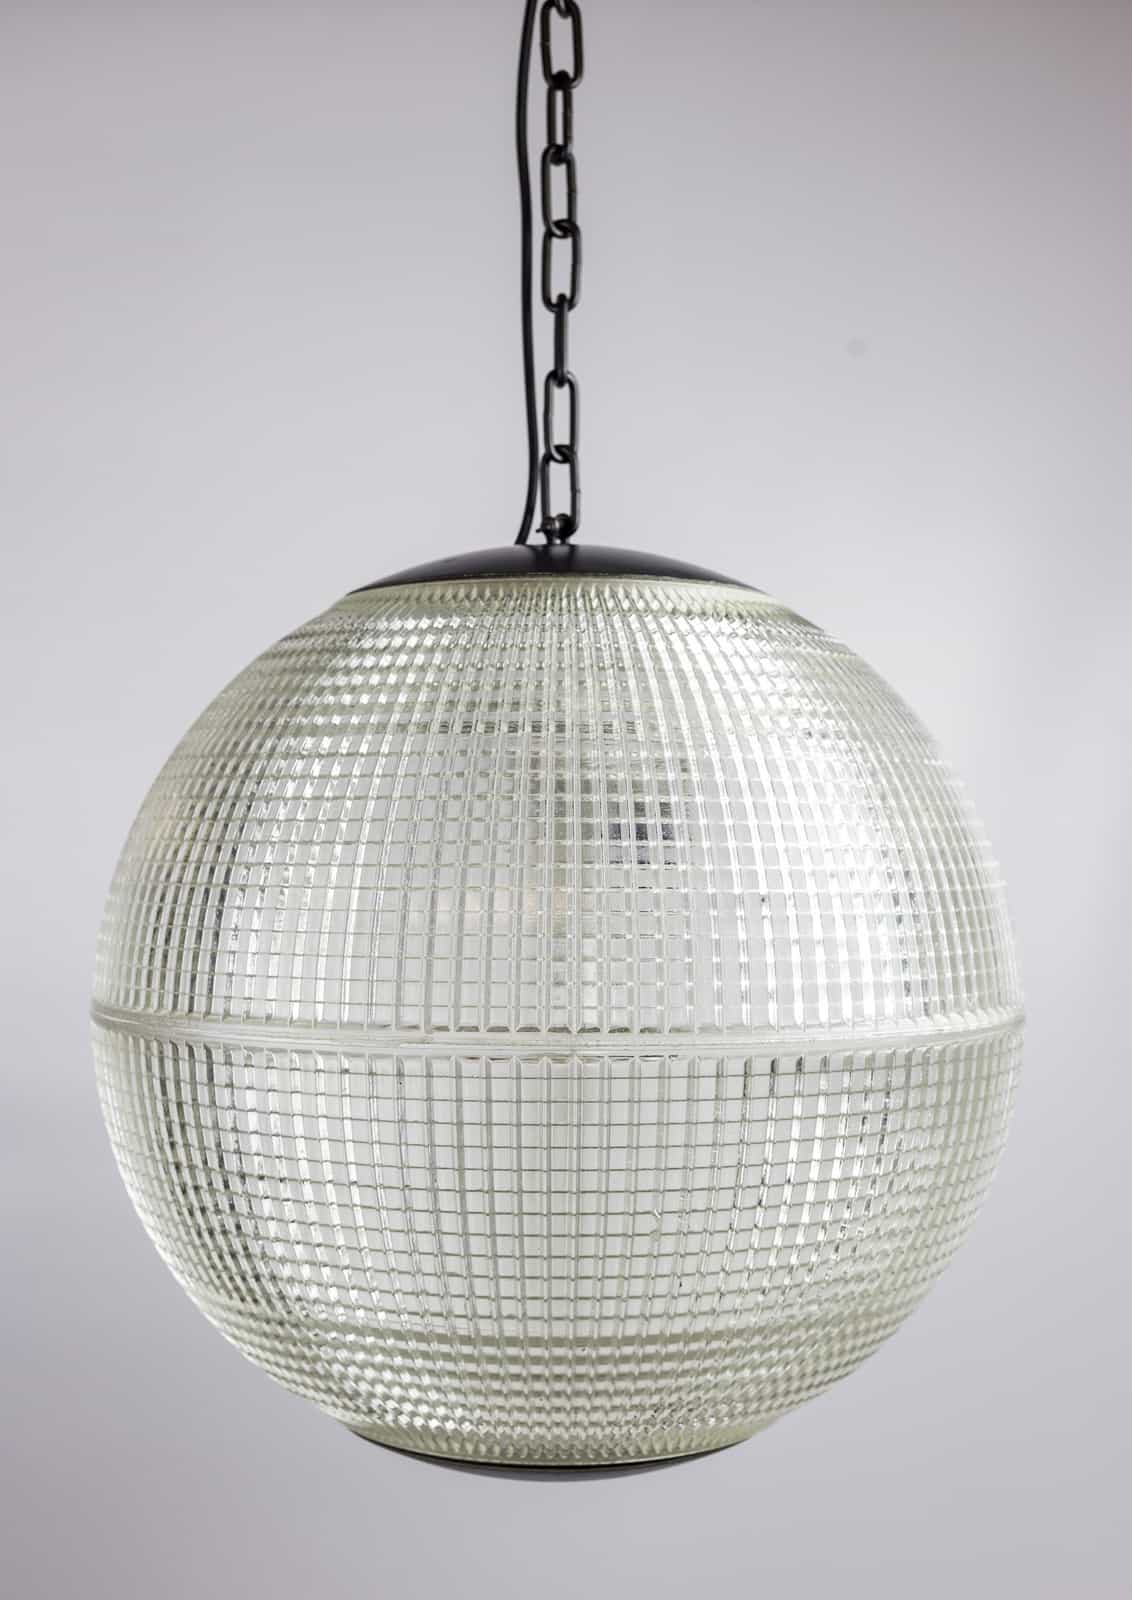 NOTE: These lights have a varying degree of cosmetic damage - mostly chips.



Beautifully formed spherical Parisian glass street lights, made in France. c.1960.

This version has the 50cm diameter, these lights have remained in amazing